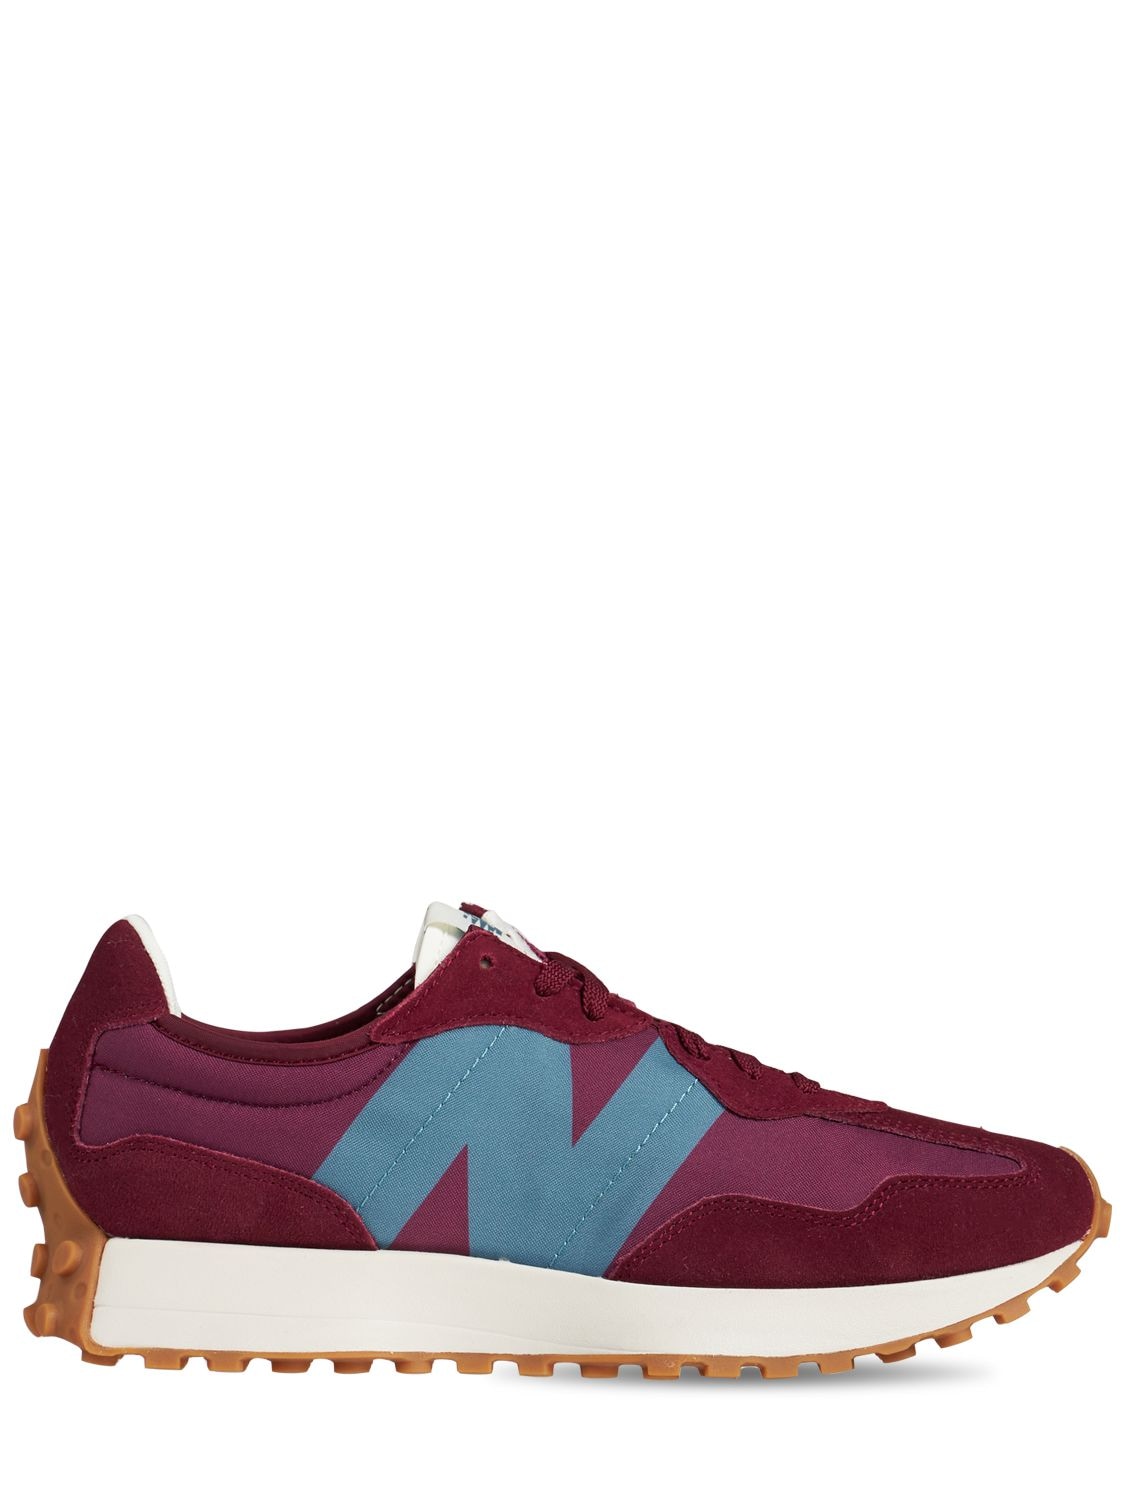 NEW BALANCE 327 SNEAKERS,74I4OW023-SEUX0